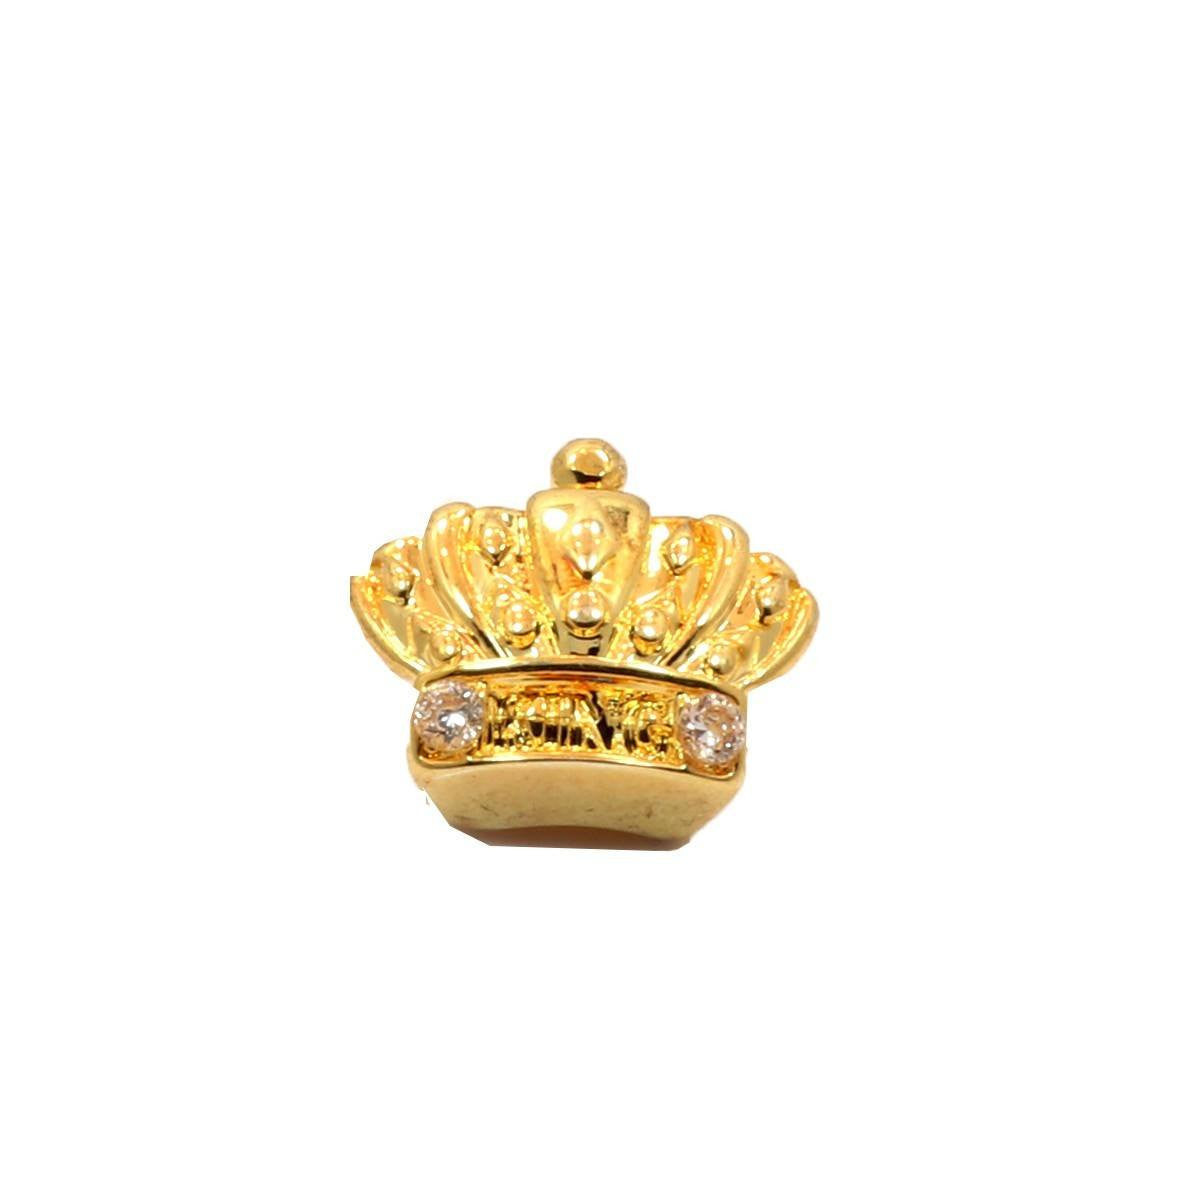 GOLD GRILLZ SINGLE TOOTH CROWN